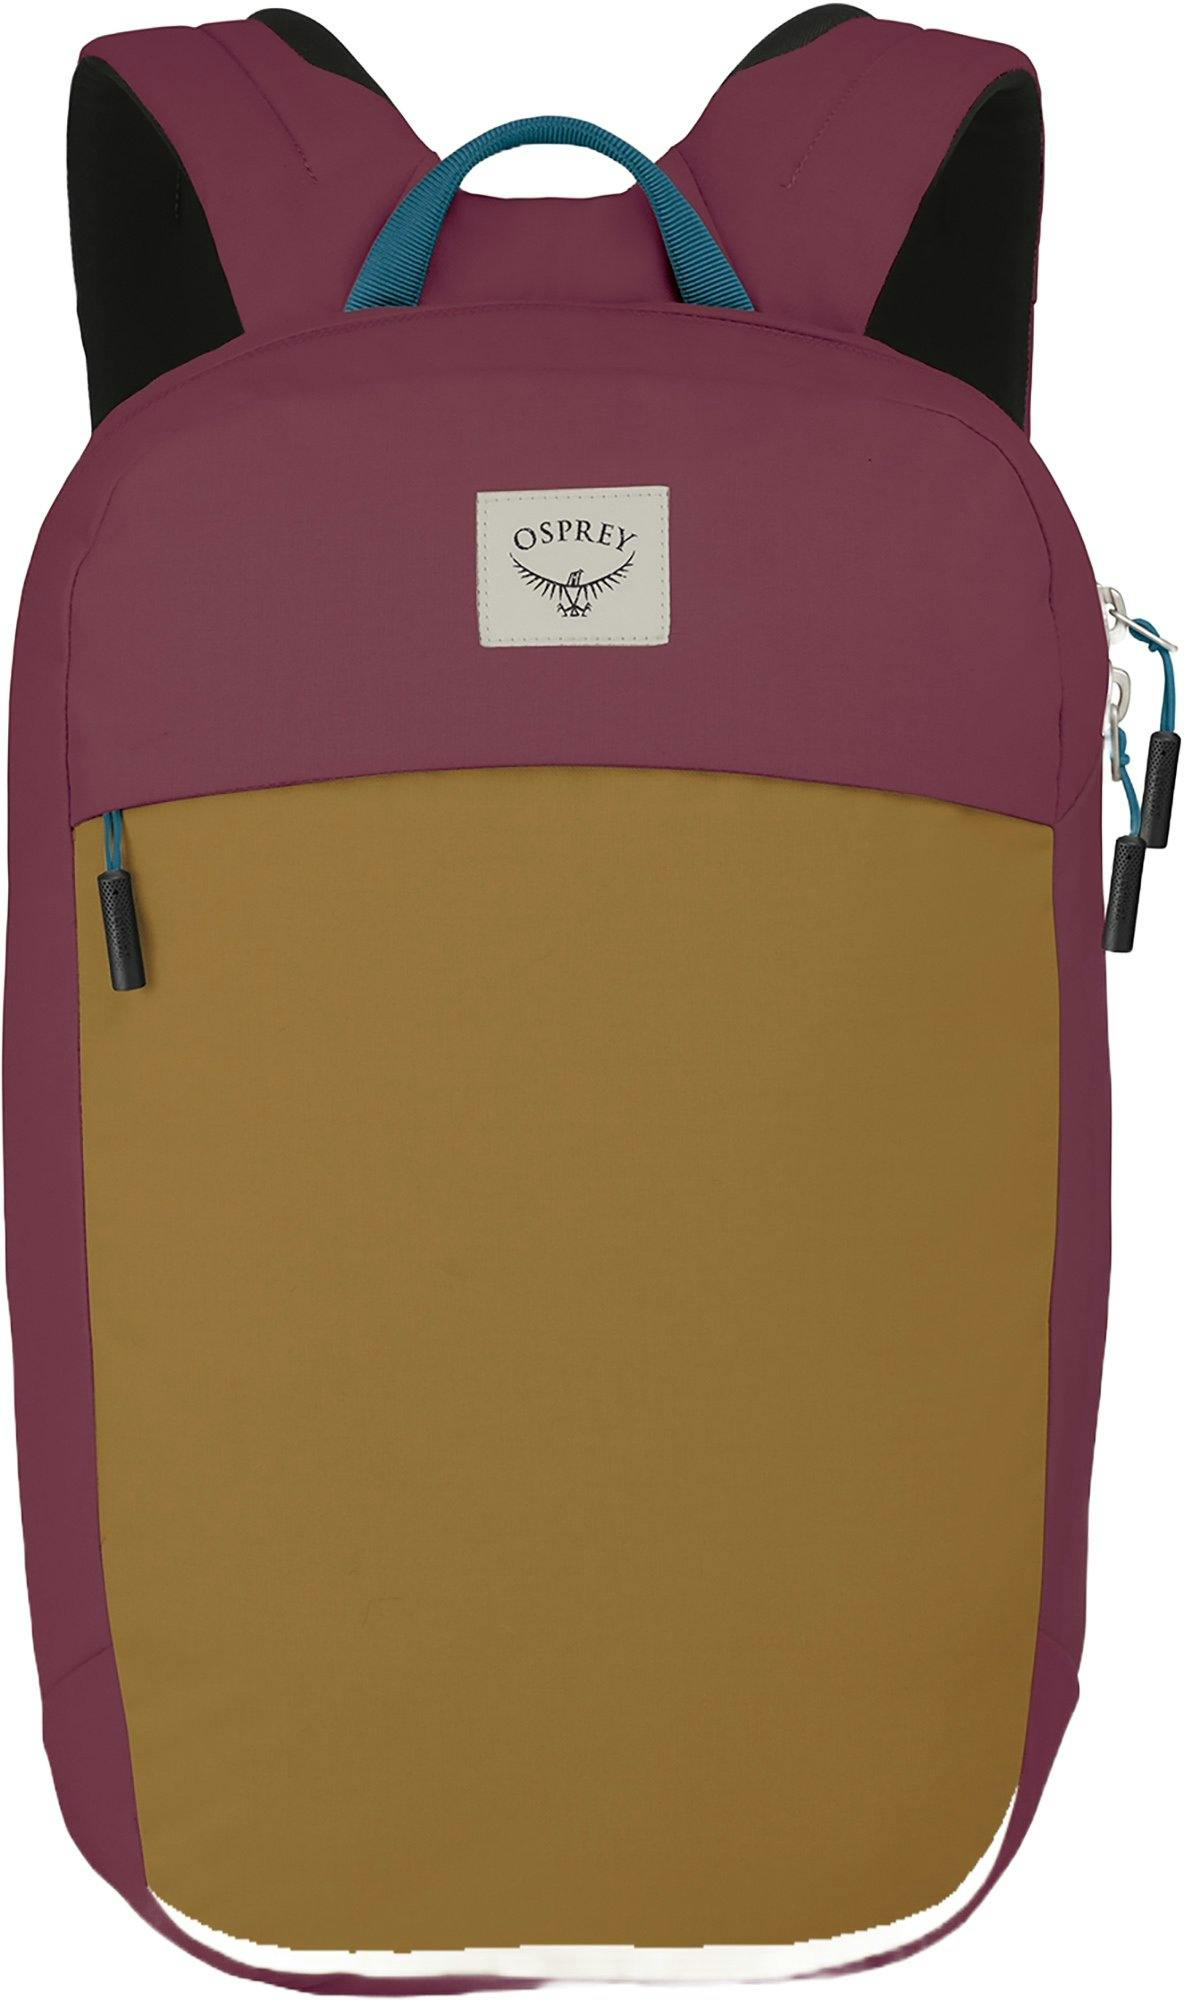 Product image for Arcane Daypack 20L - Large 